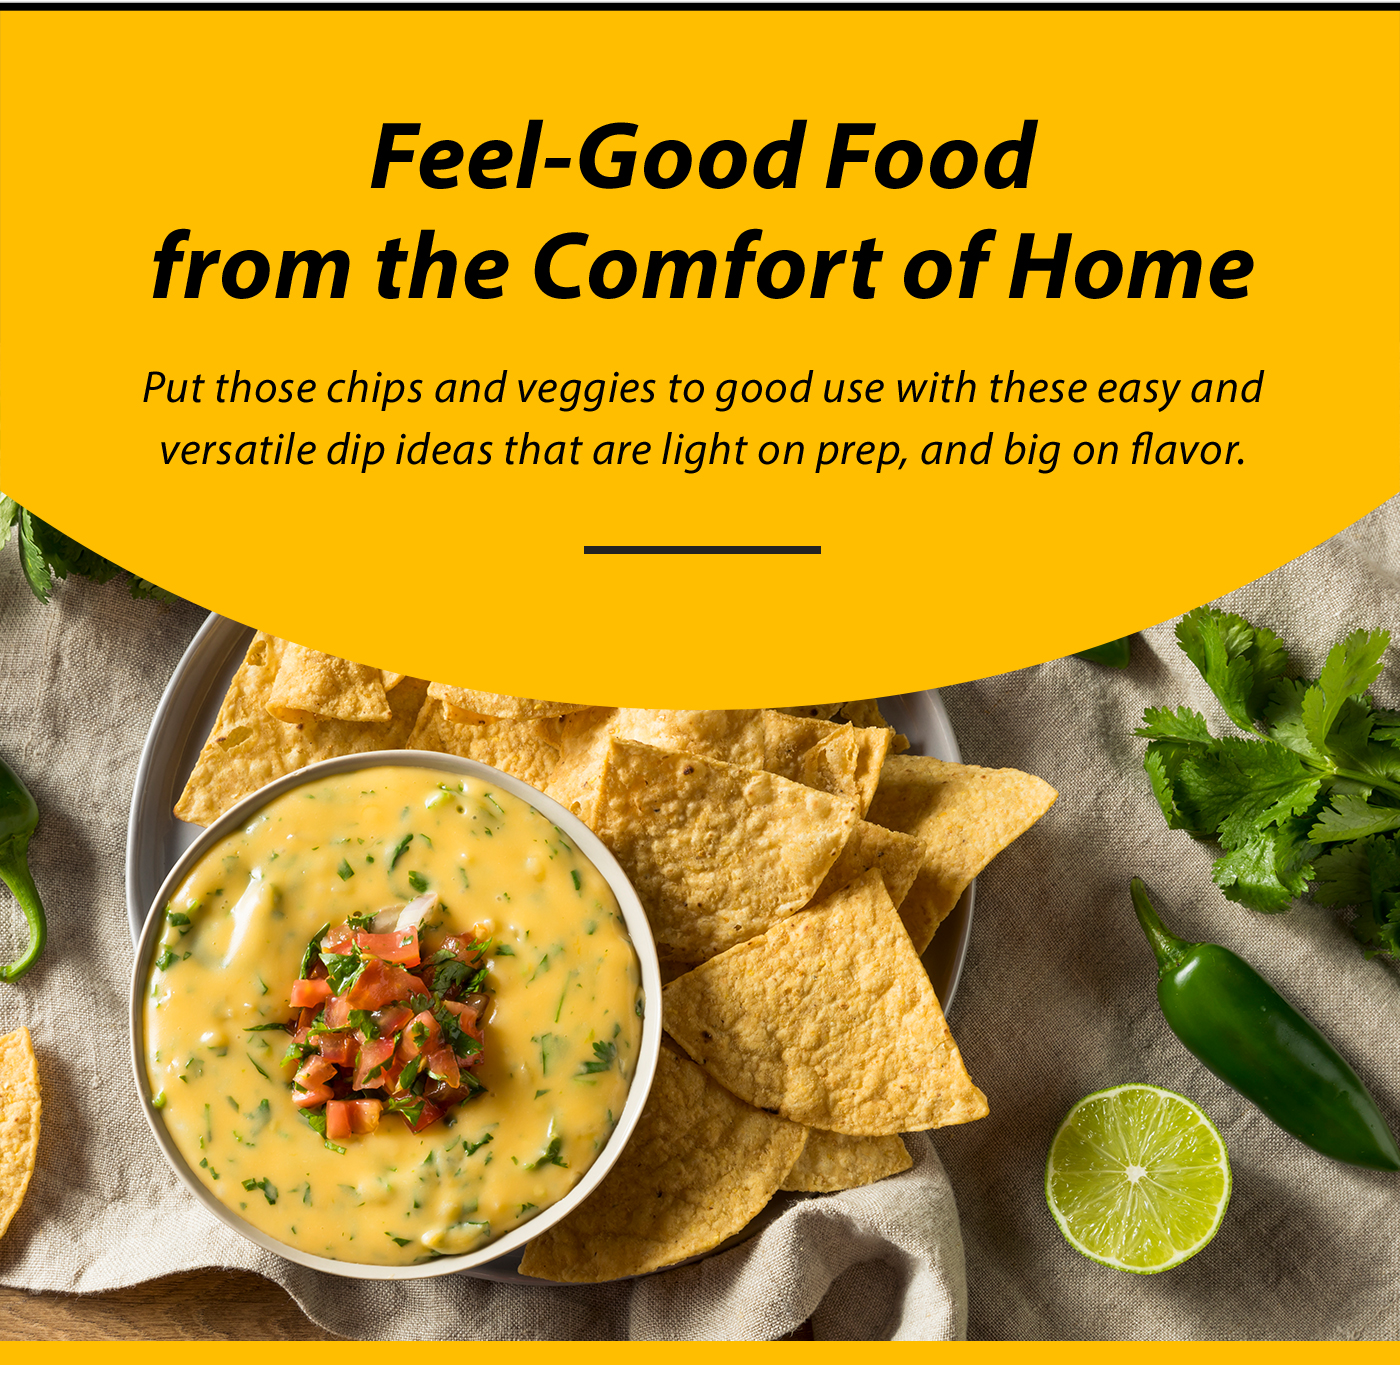 Feel-Good Food from the Comfort of Home